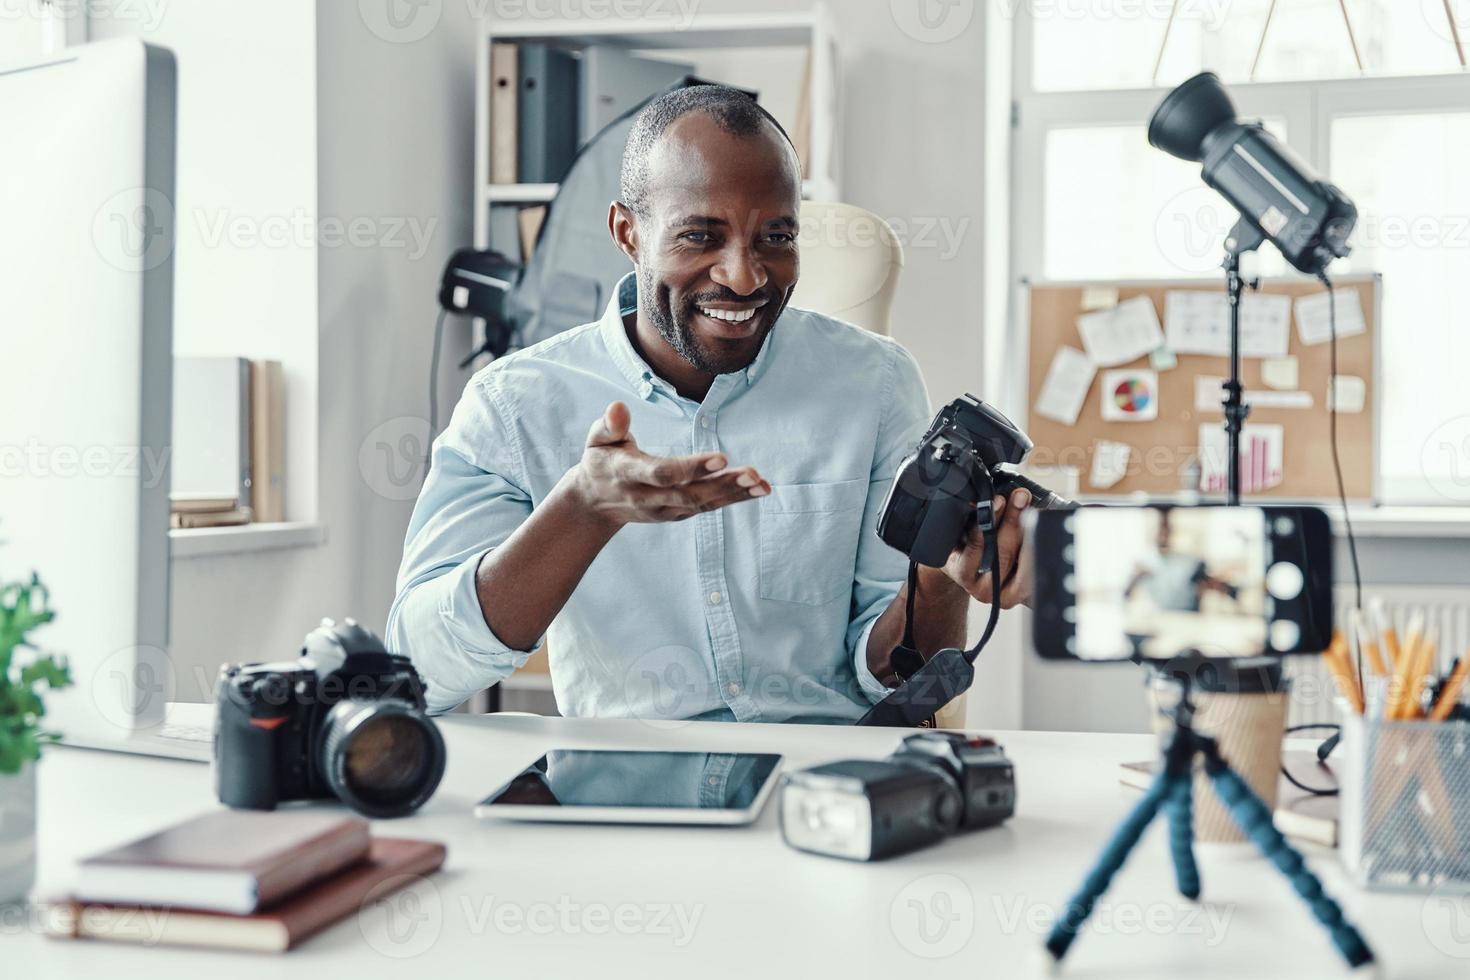 Charming young African man in shirt showing digital camera and telling something while making social media video photo